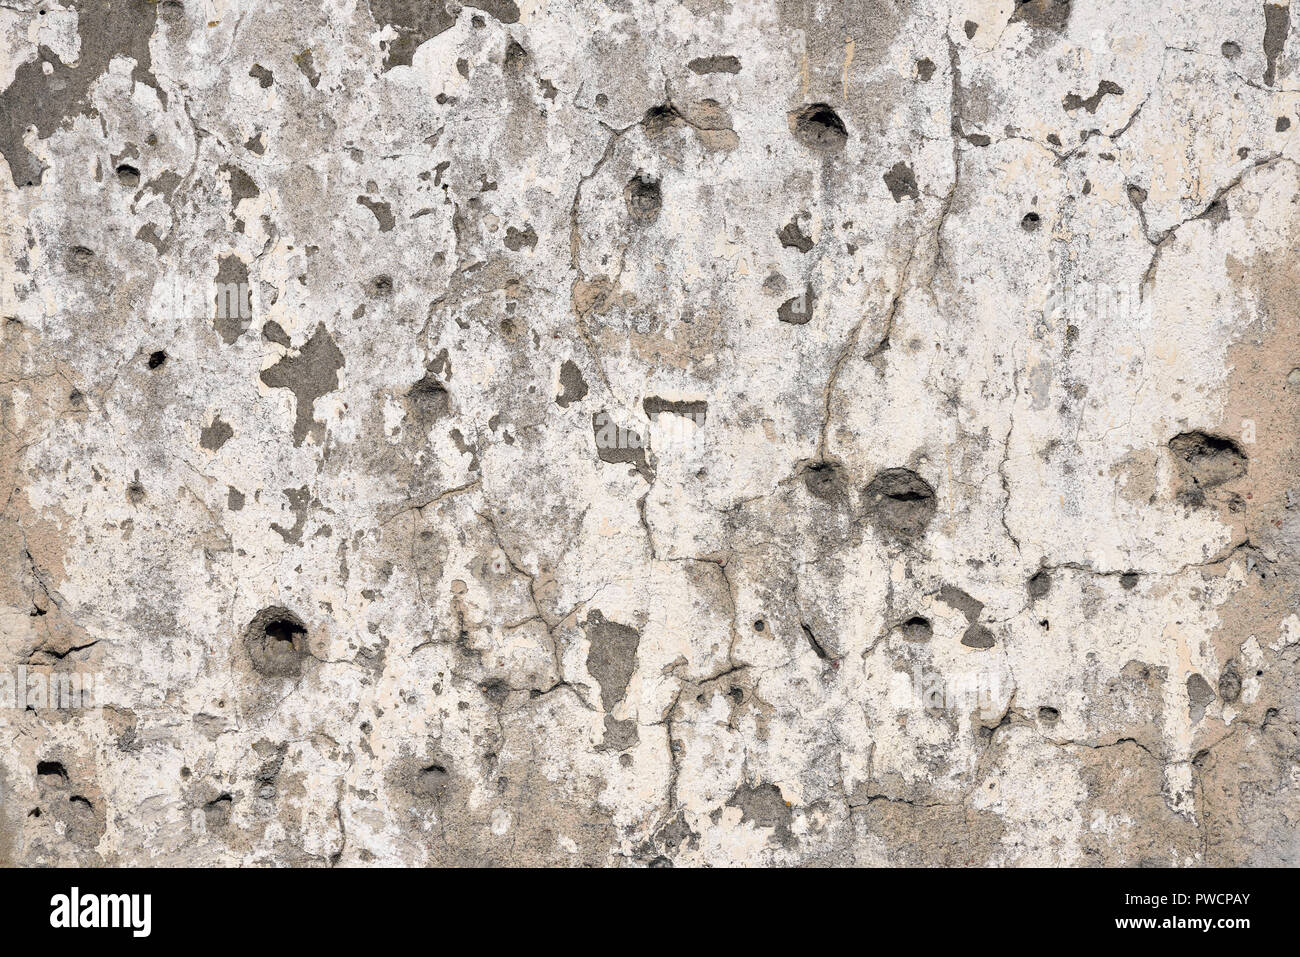 Concrete wall background with bullet holes, potholes from weapon shooting Stock Photo